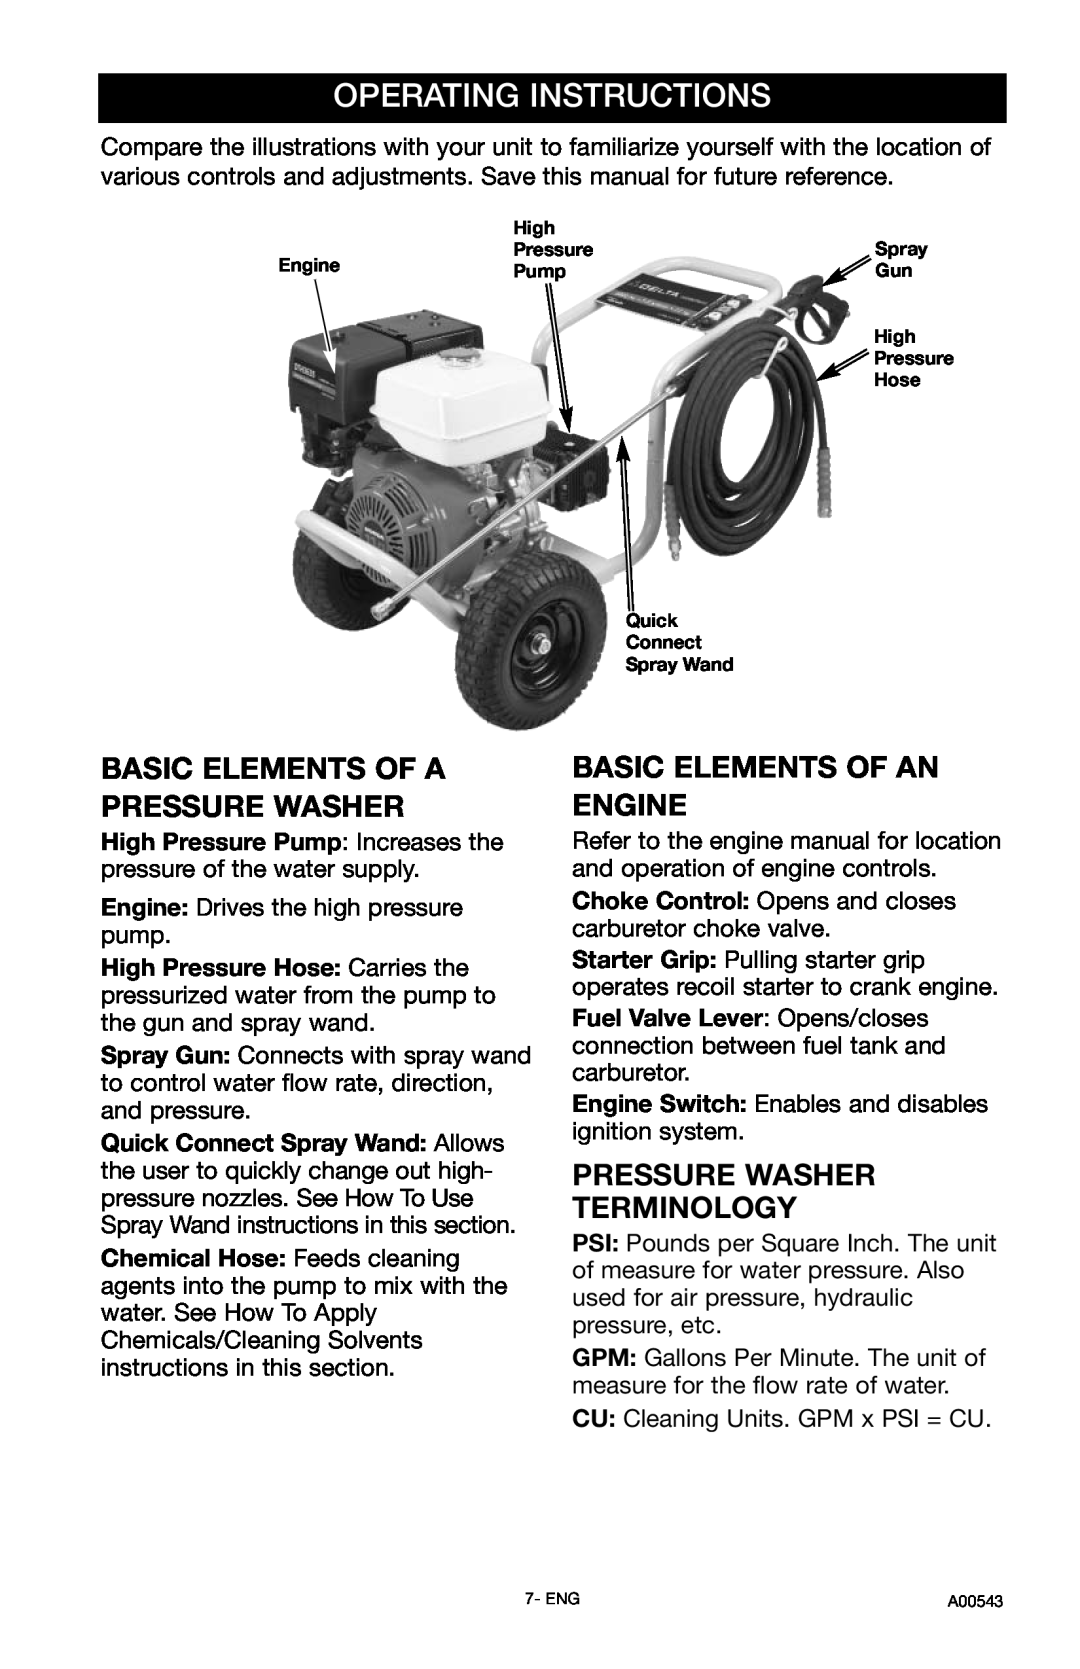 Delta DTH3635, A00543 Operating Instructions, Basic Elements Of A Pressure Washer, Basic Elements Of An Engine 